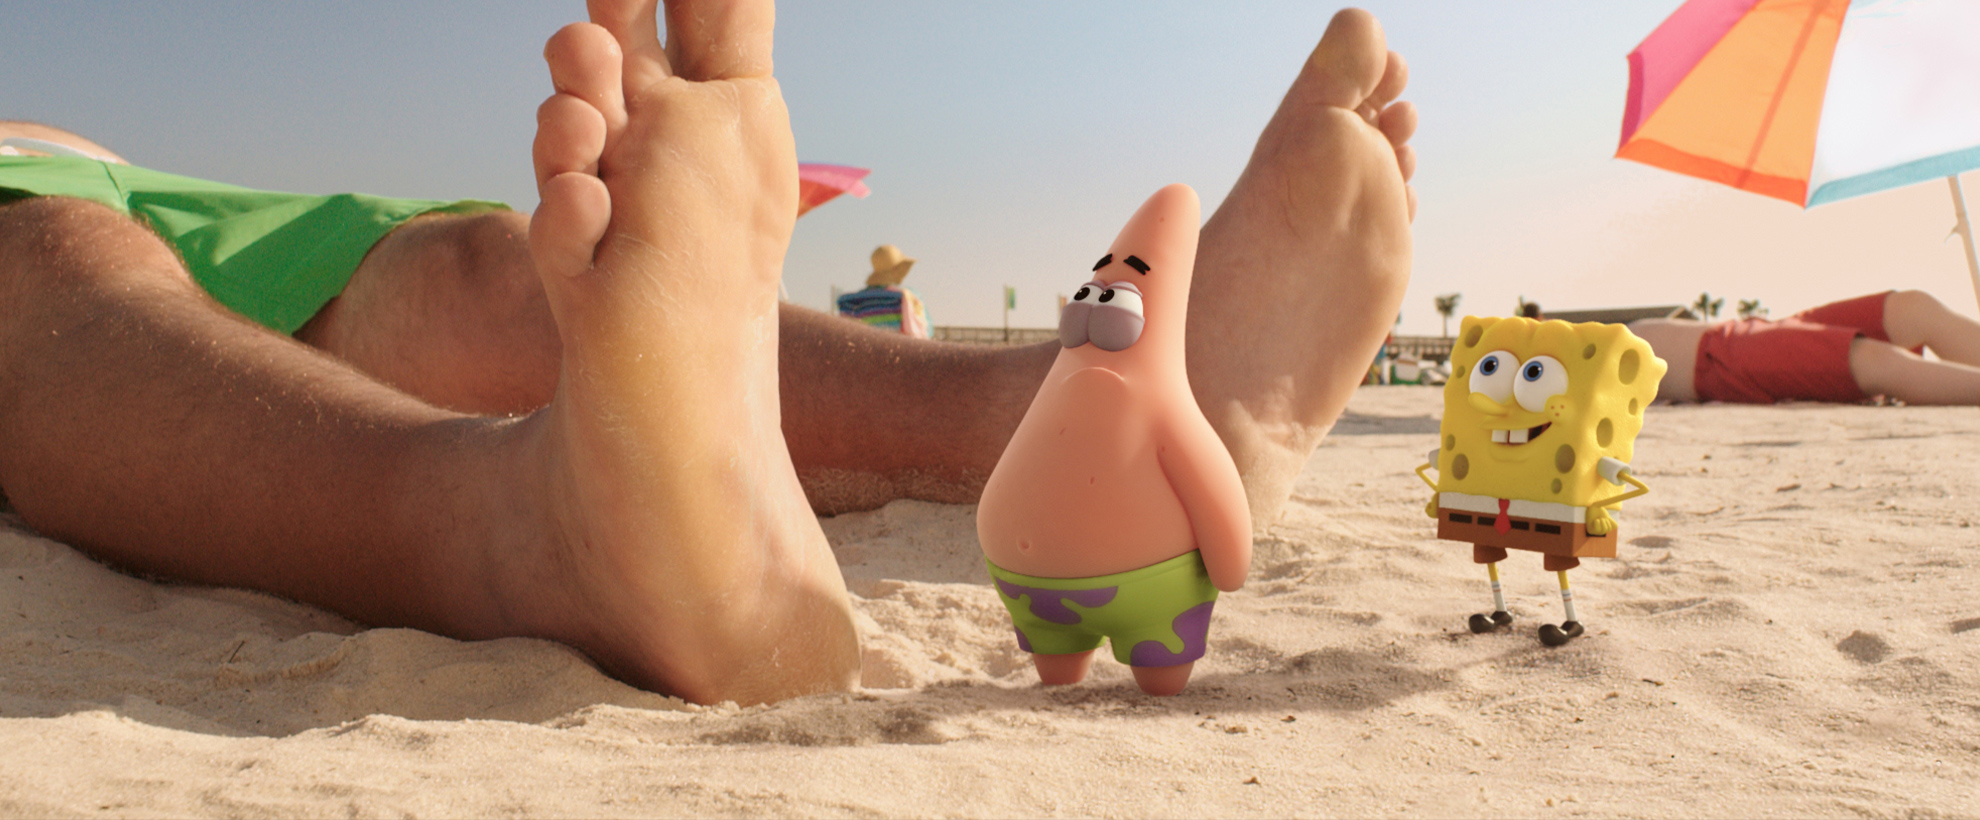 Spongebob and Patrick stand on the shore of a beach, looking at a large human foot